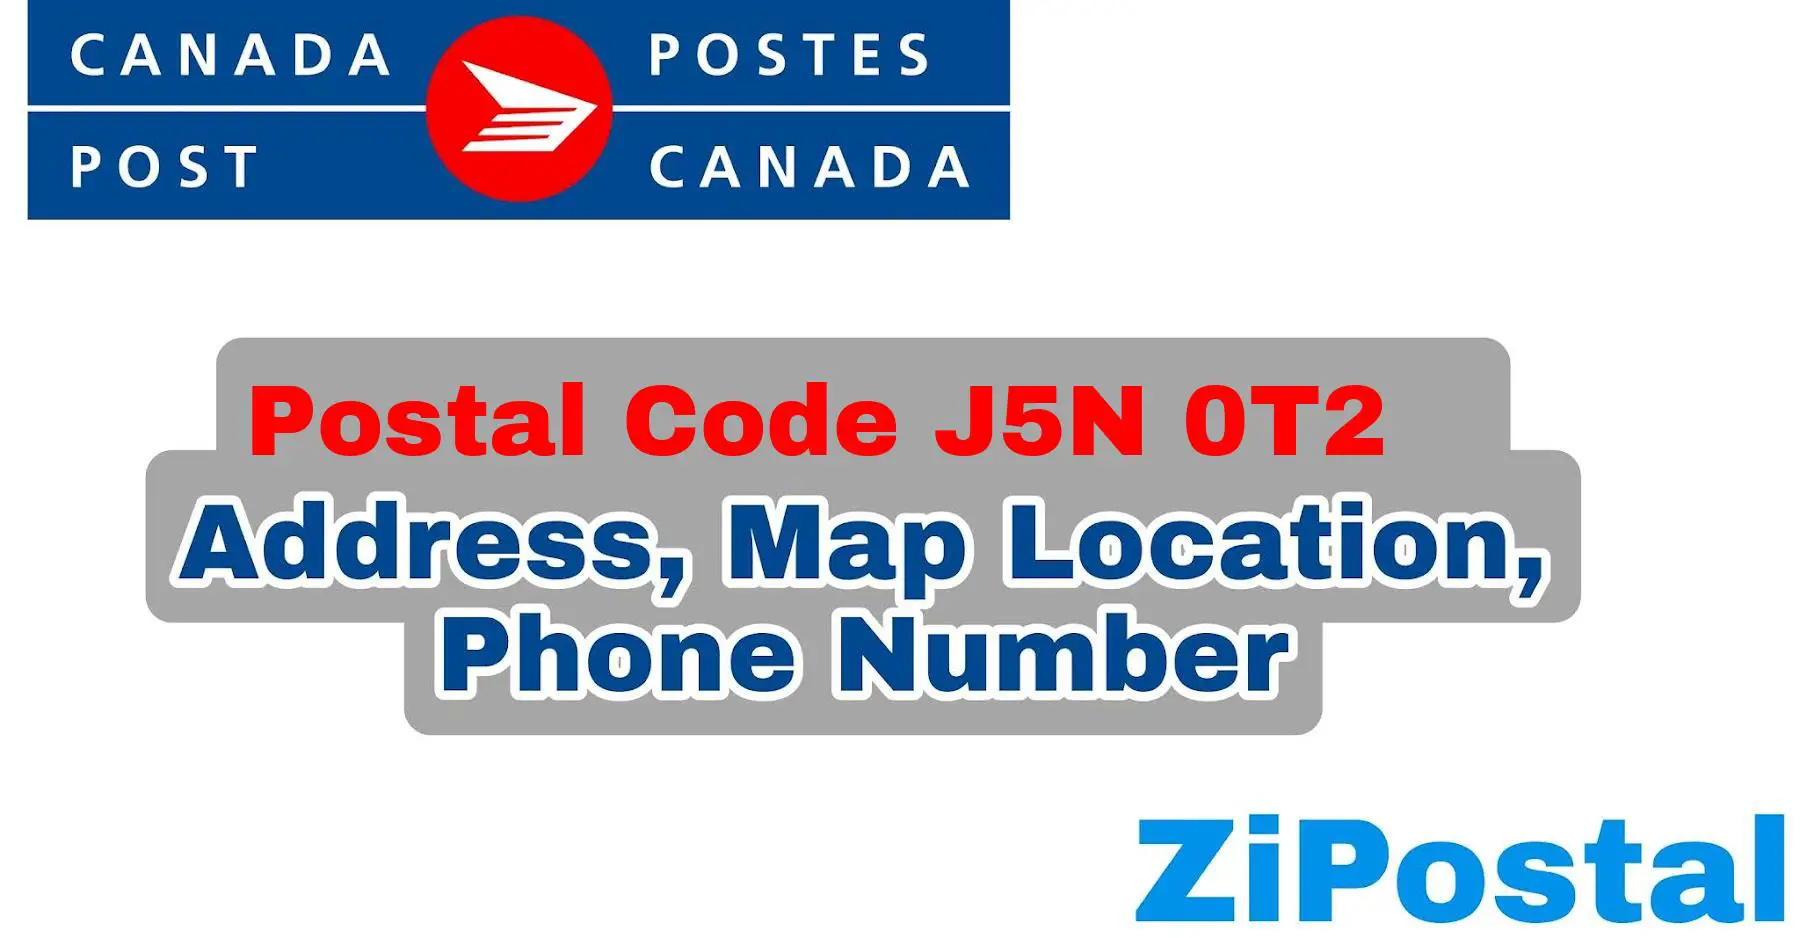 Postal Code J5N 0T2 Address Map Location and Phone Number